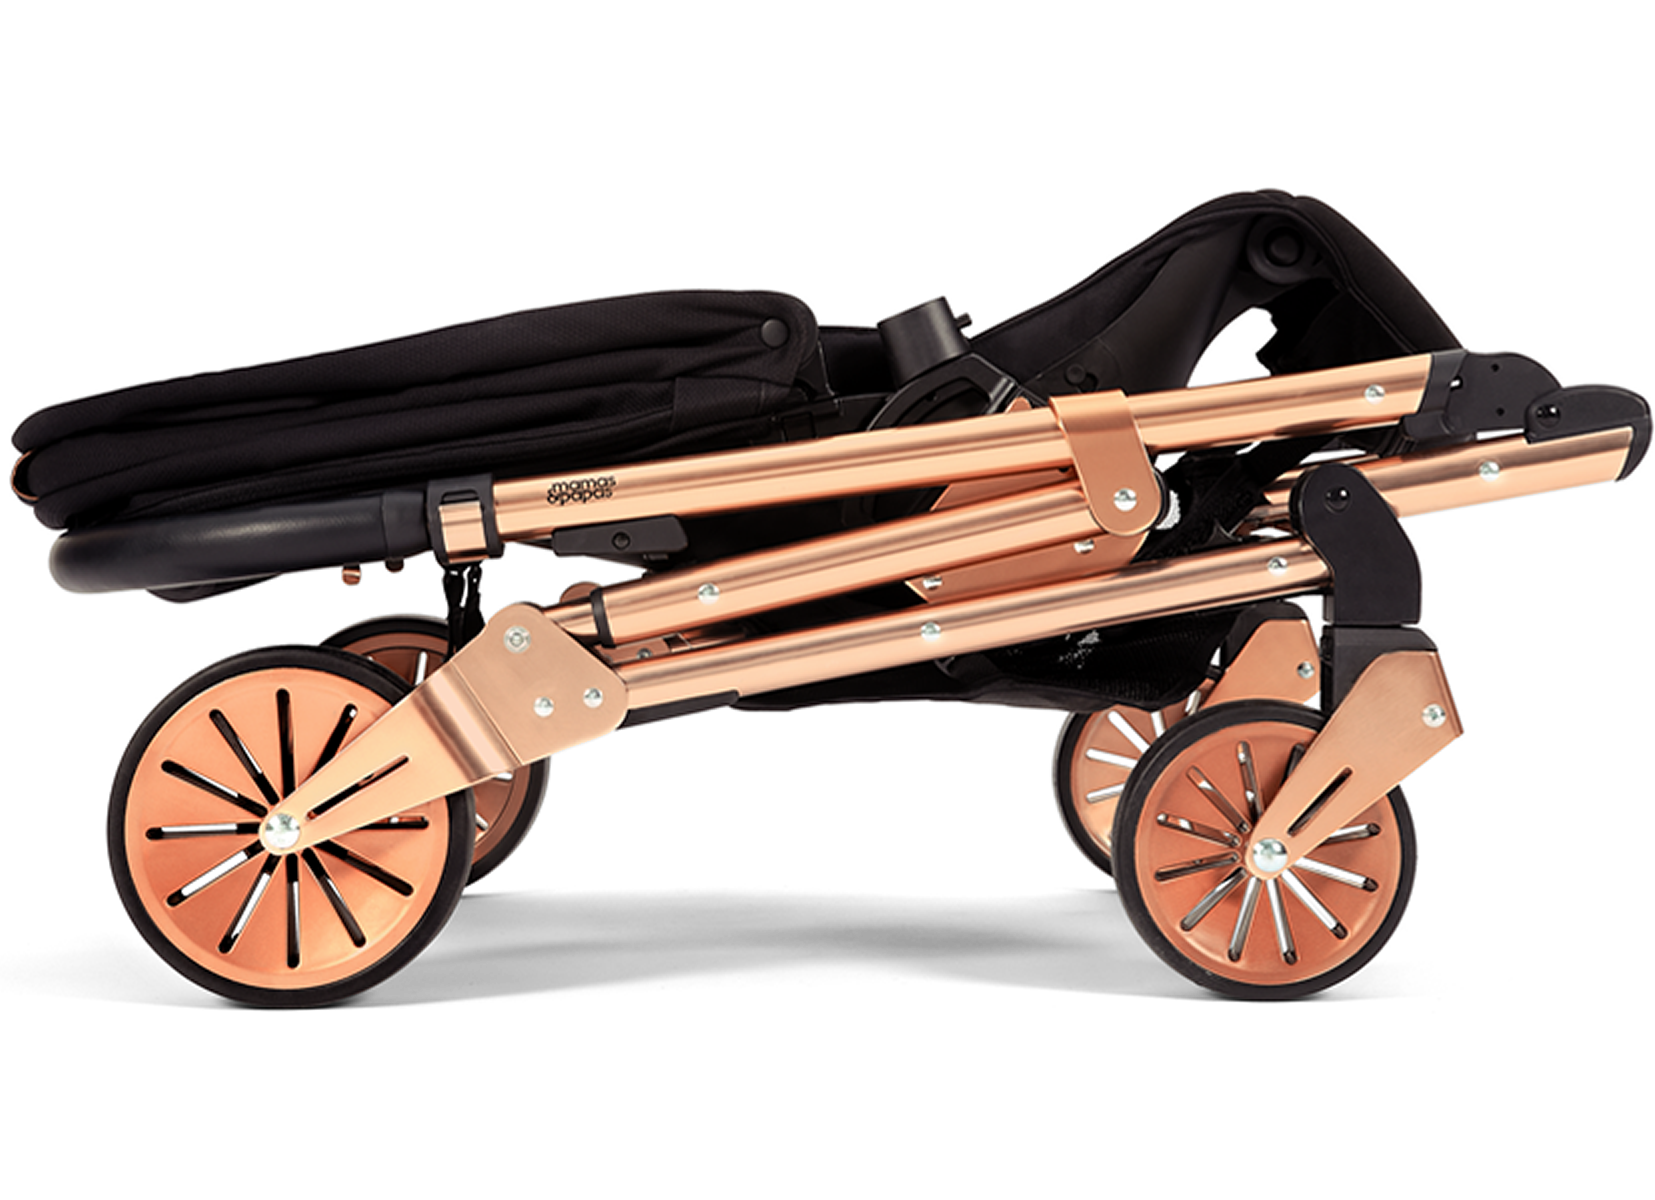 mamas and papas rose gold travel system